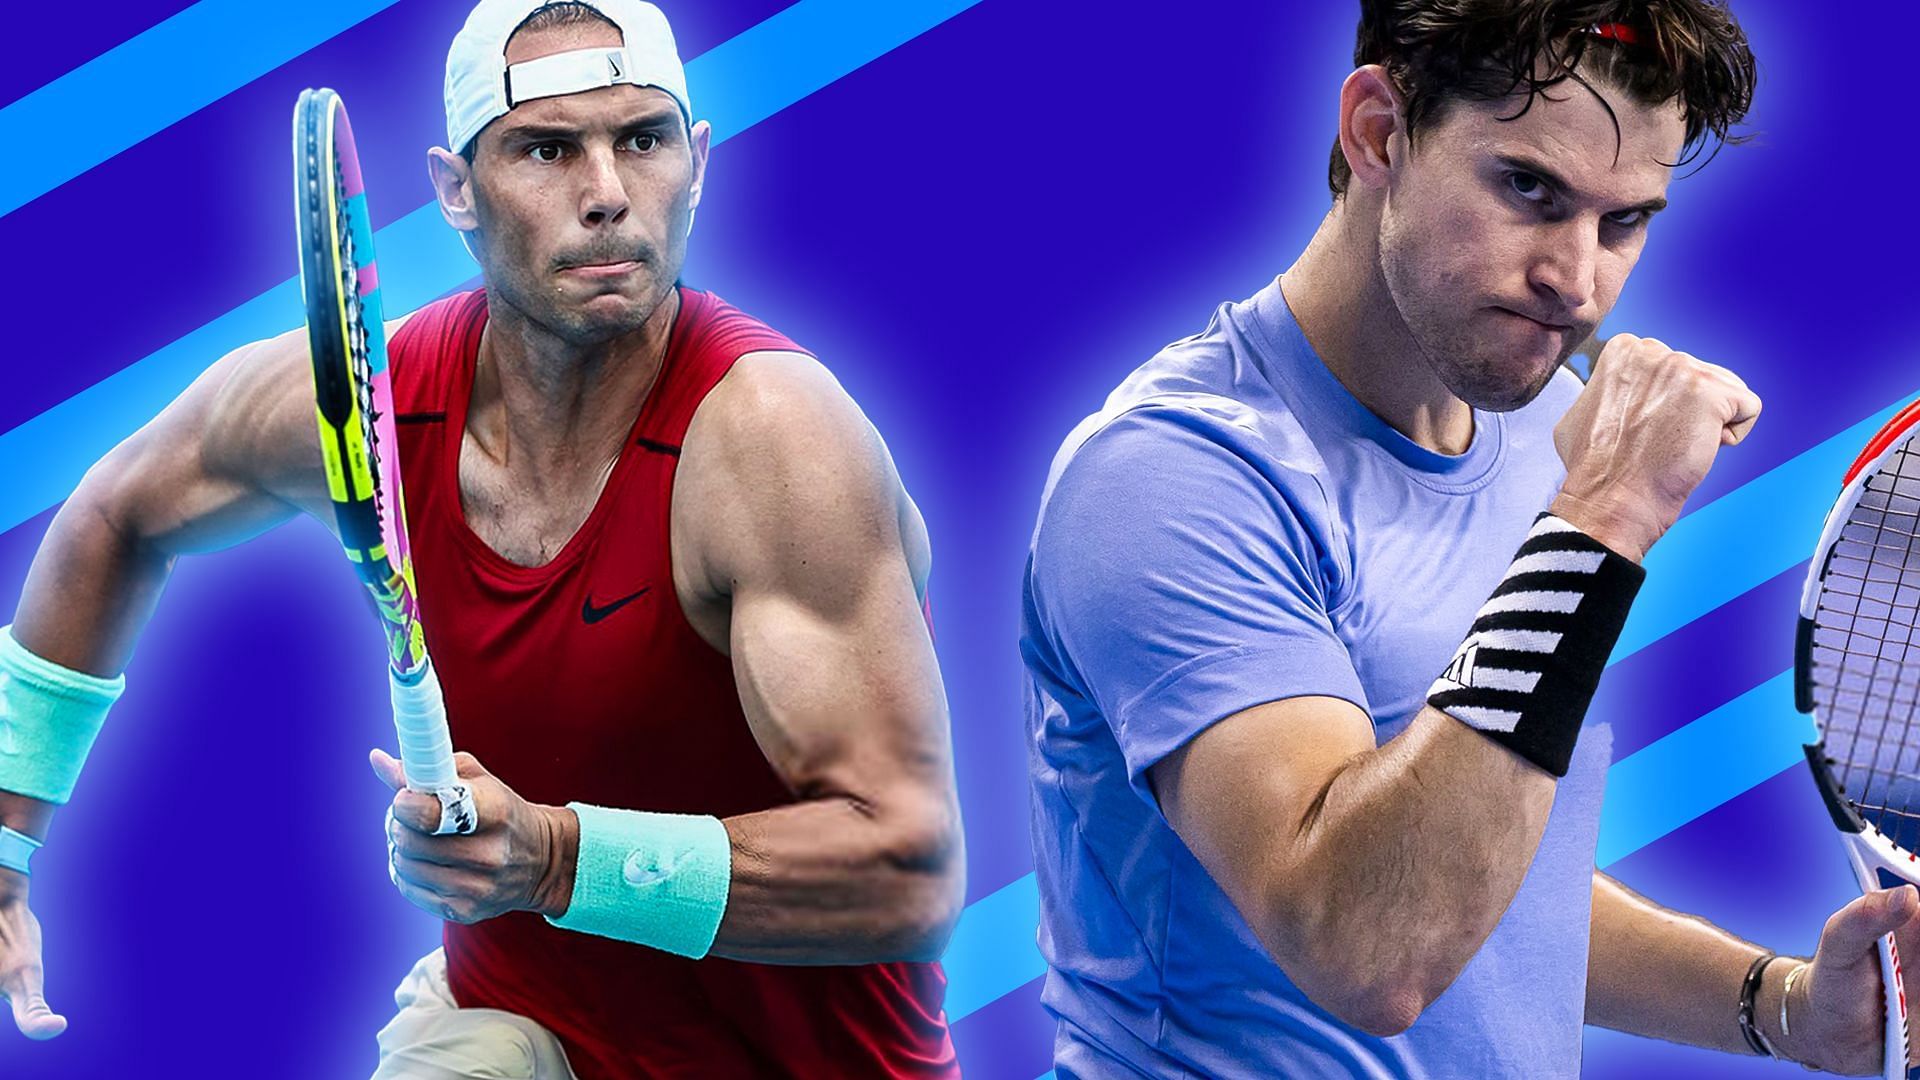 3 First-round matches at Brisbane International to look out for ft. Rafael Nadal vs. Dominic Thiem